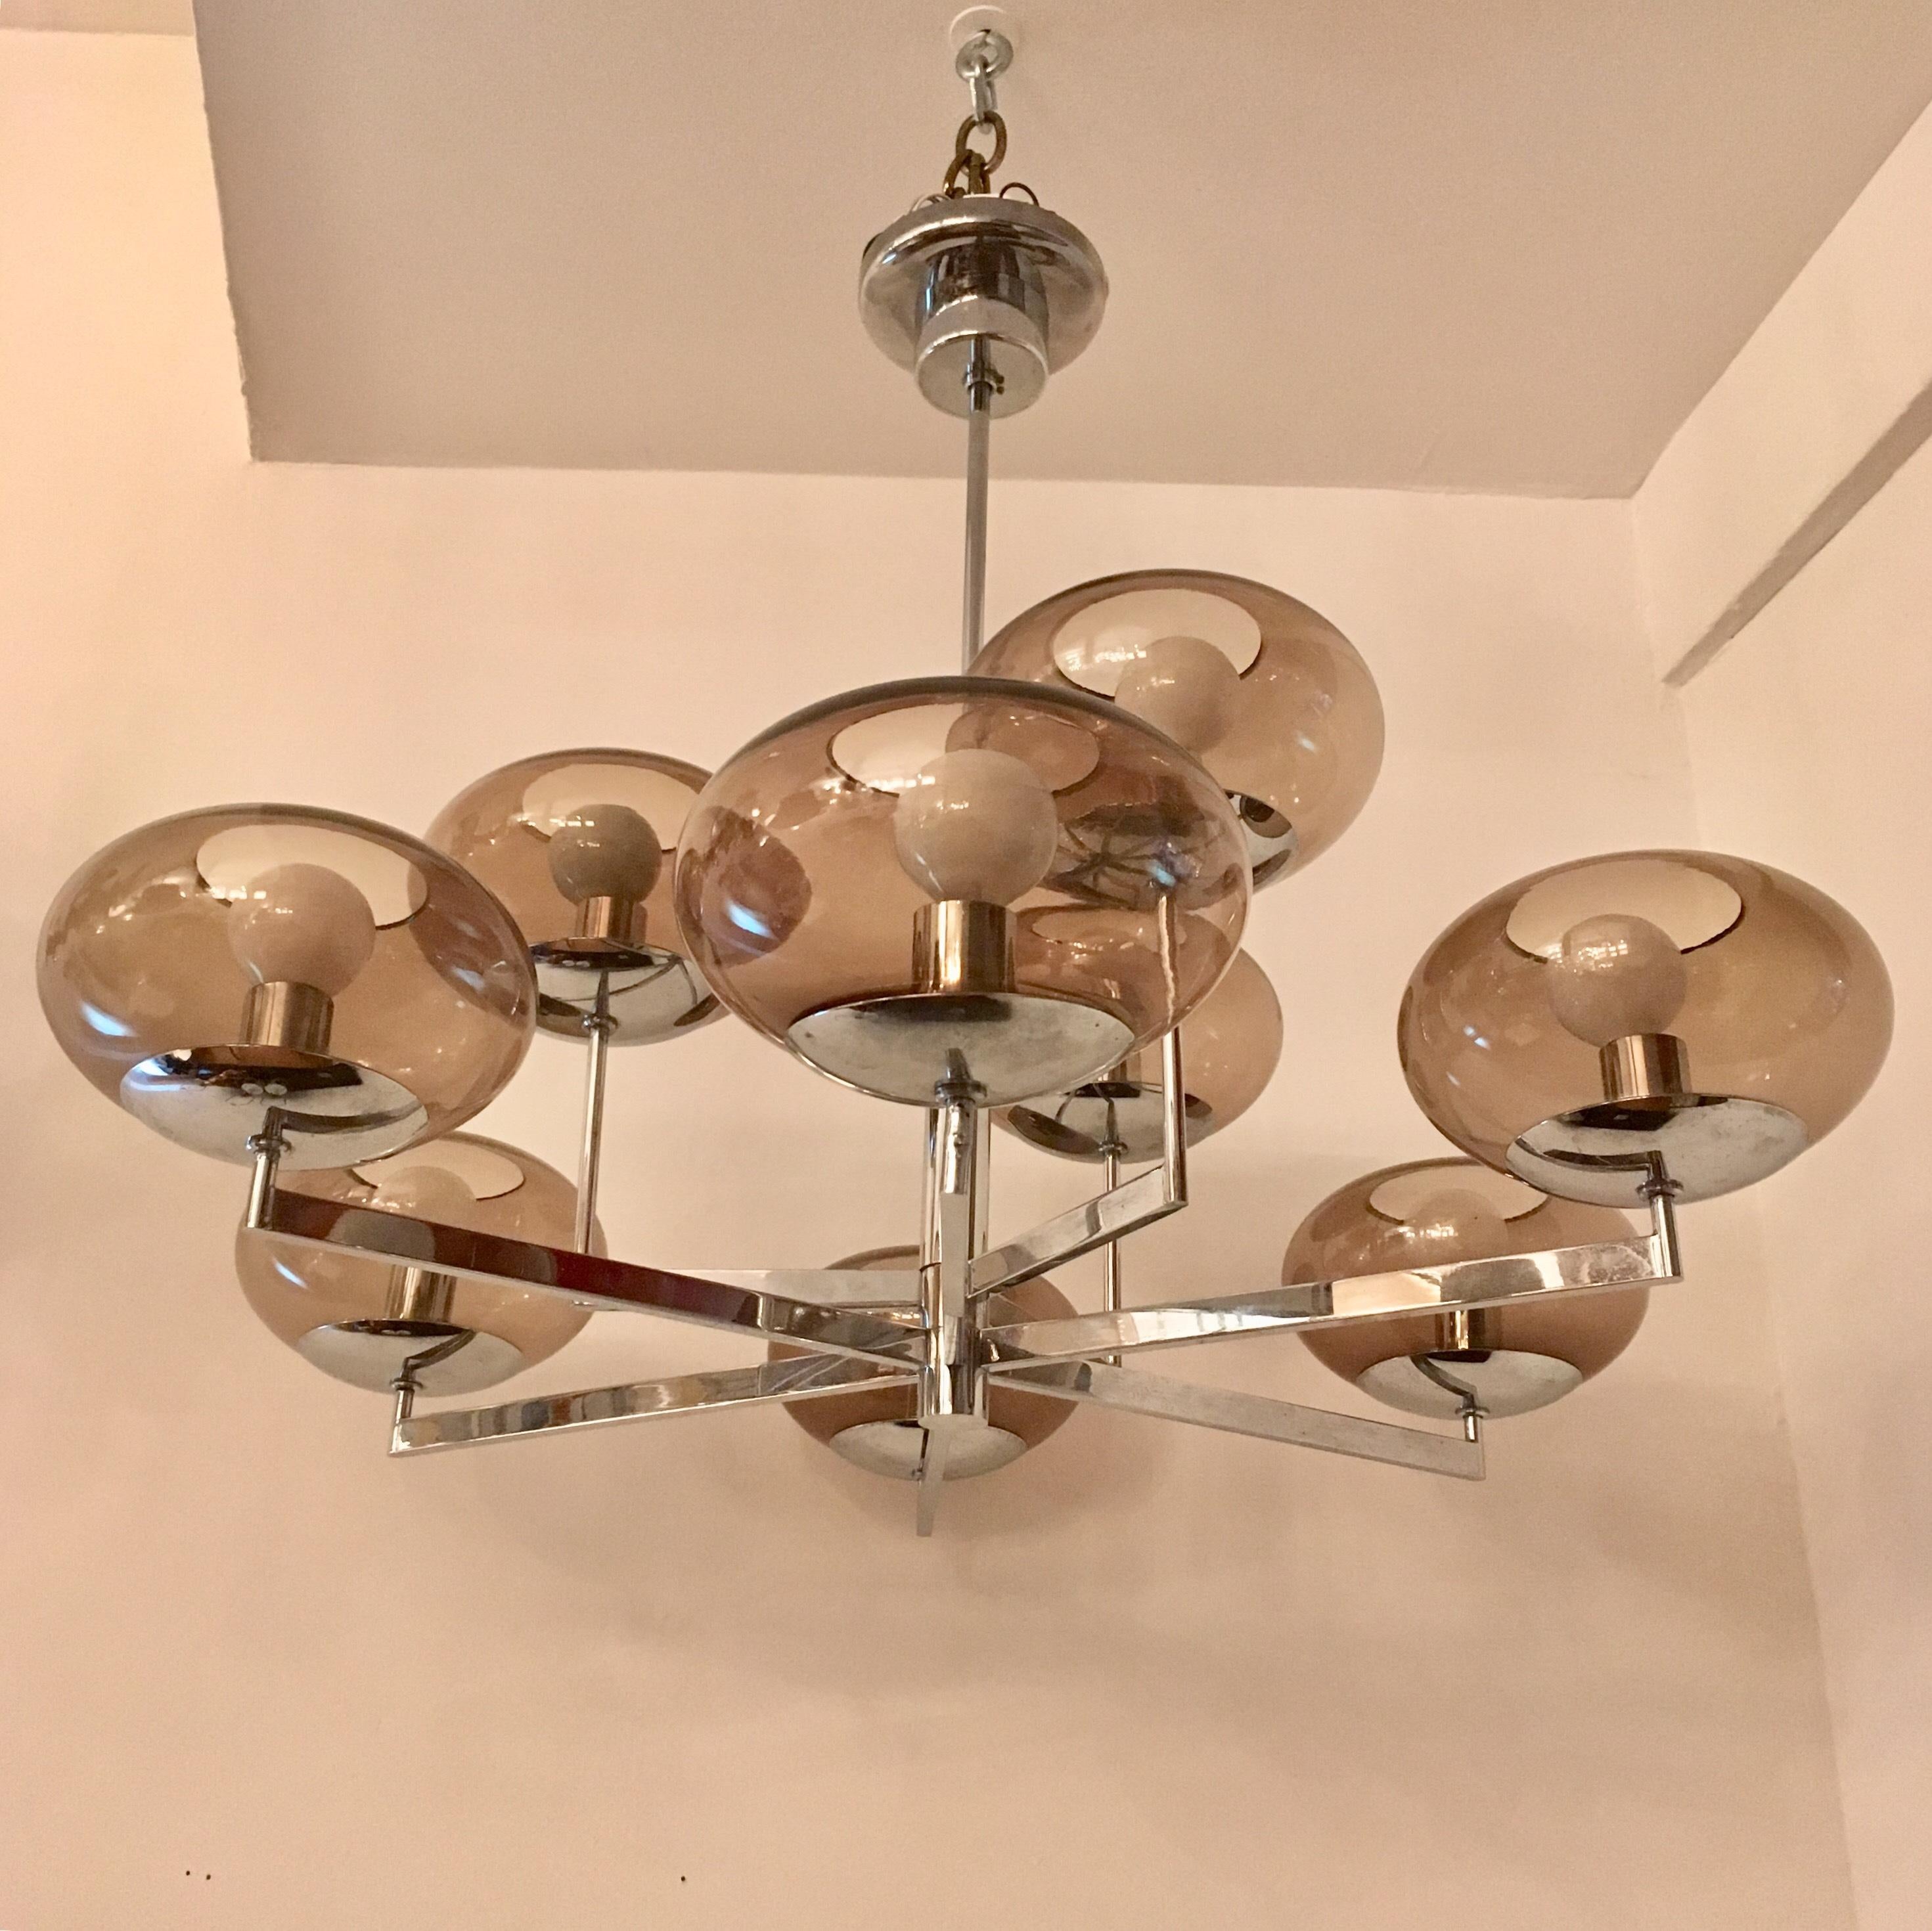 A sleek two-tier polished chrome and smoked glass globe chandelier by the famed Italian lighting company, Sciolari. Nine-light sources. Newly rewired.